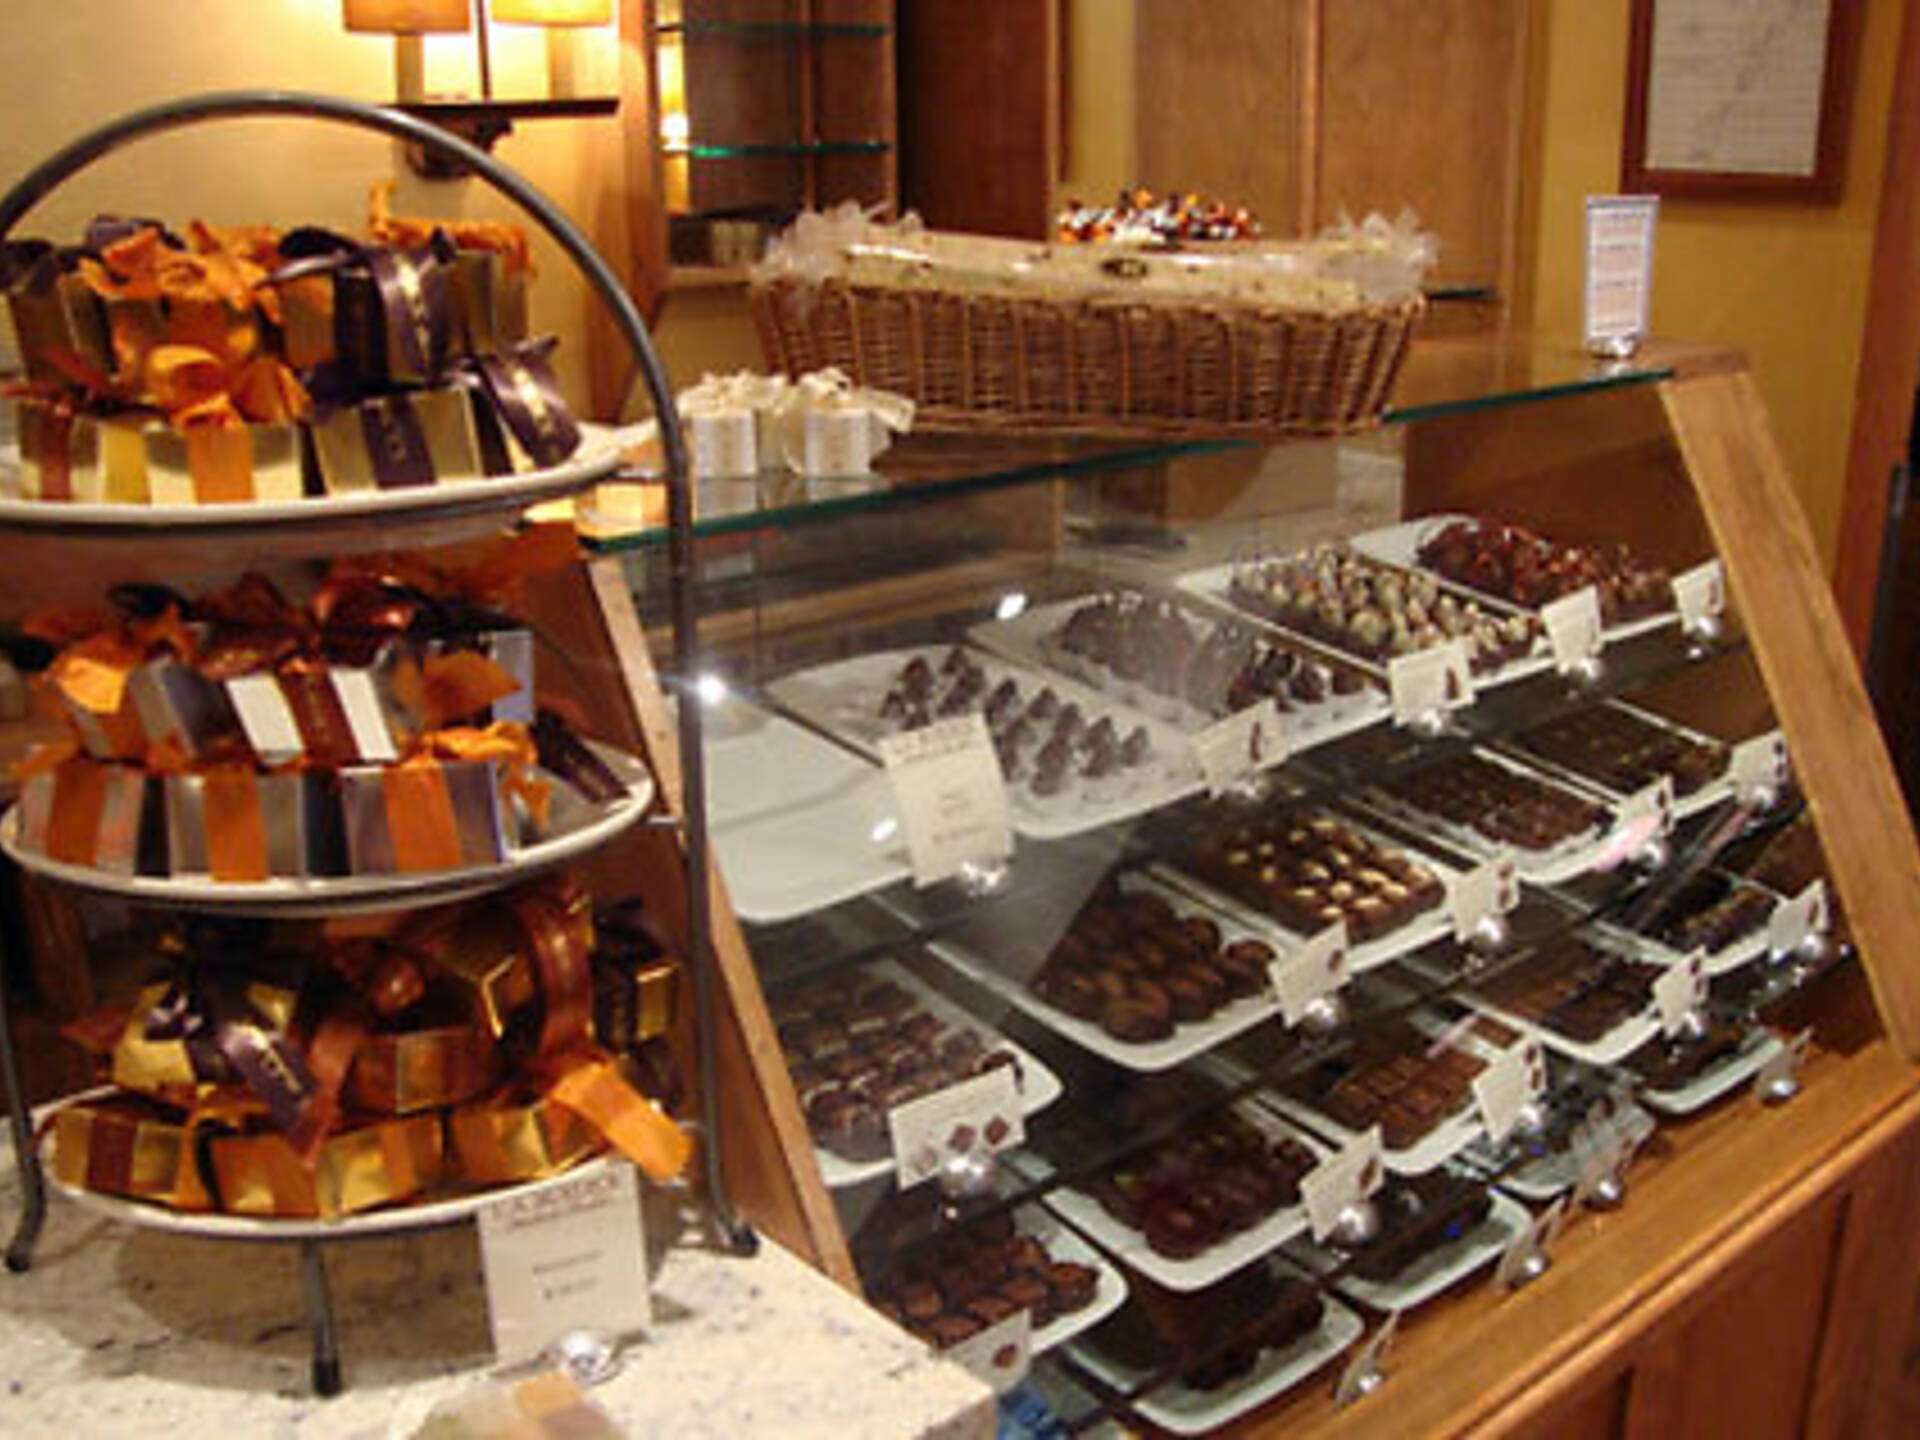 Best dessert places to score sweets in New York City 2012